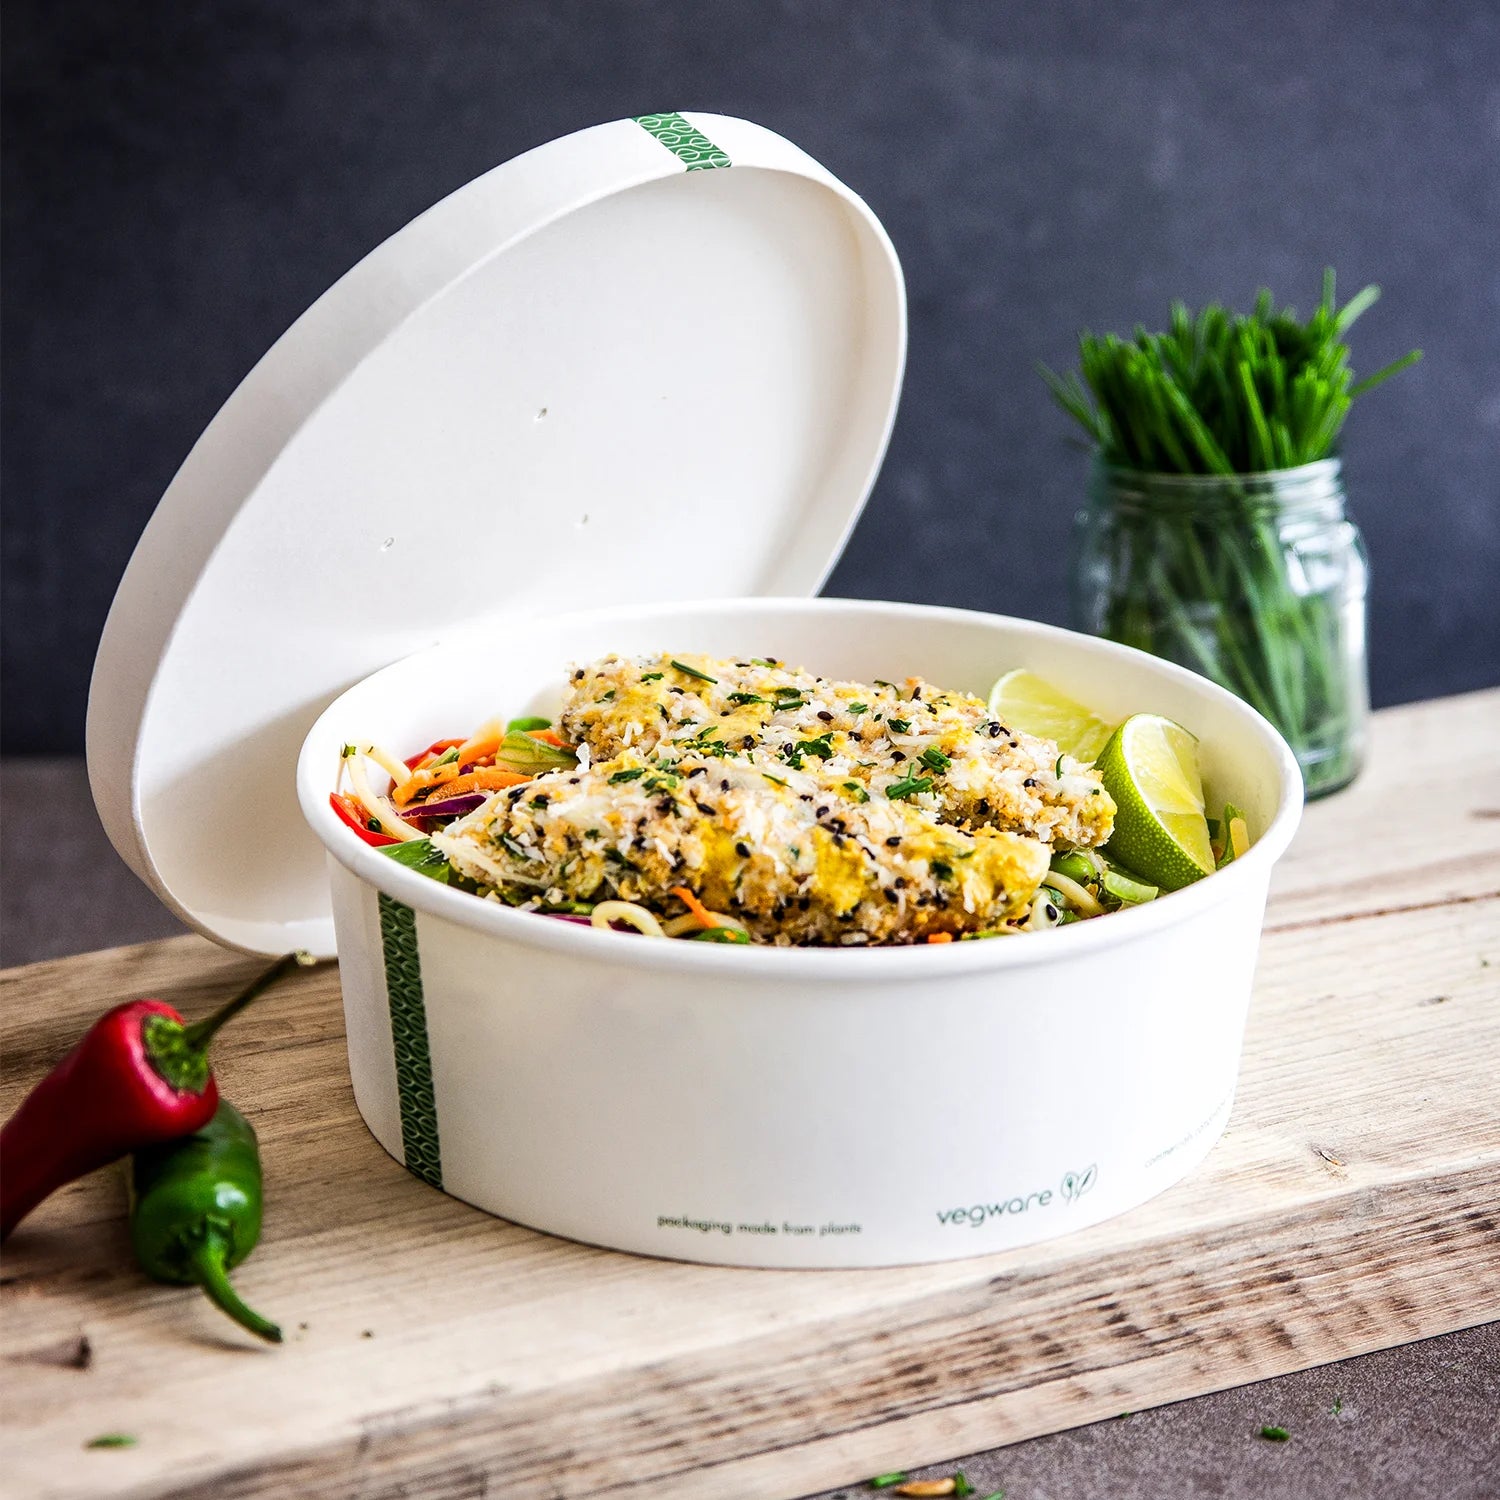 Ideal for hot and cold foods, Vegware™ 185-Series compostable 32-oz Bowls are lined with plant-based PLA and are independently certified to break down into soil within 12 weeks.